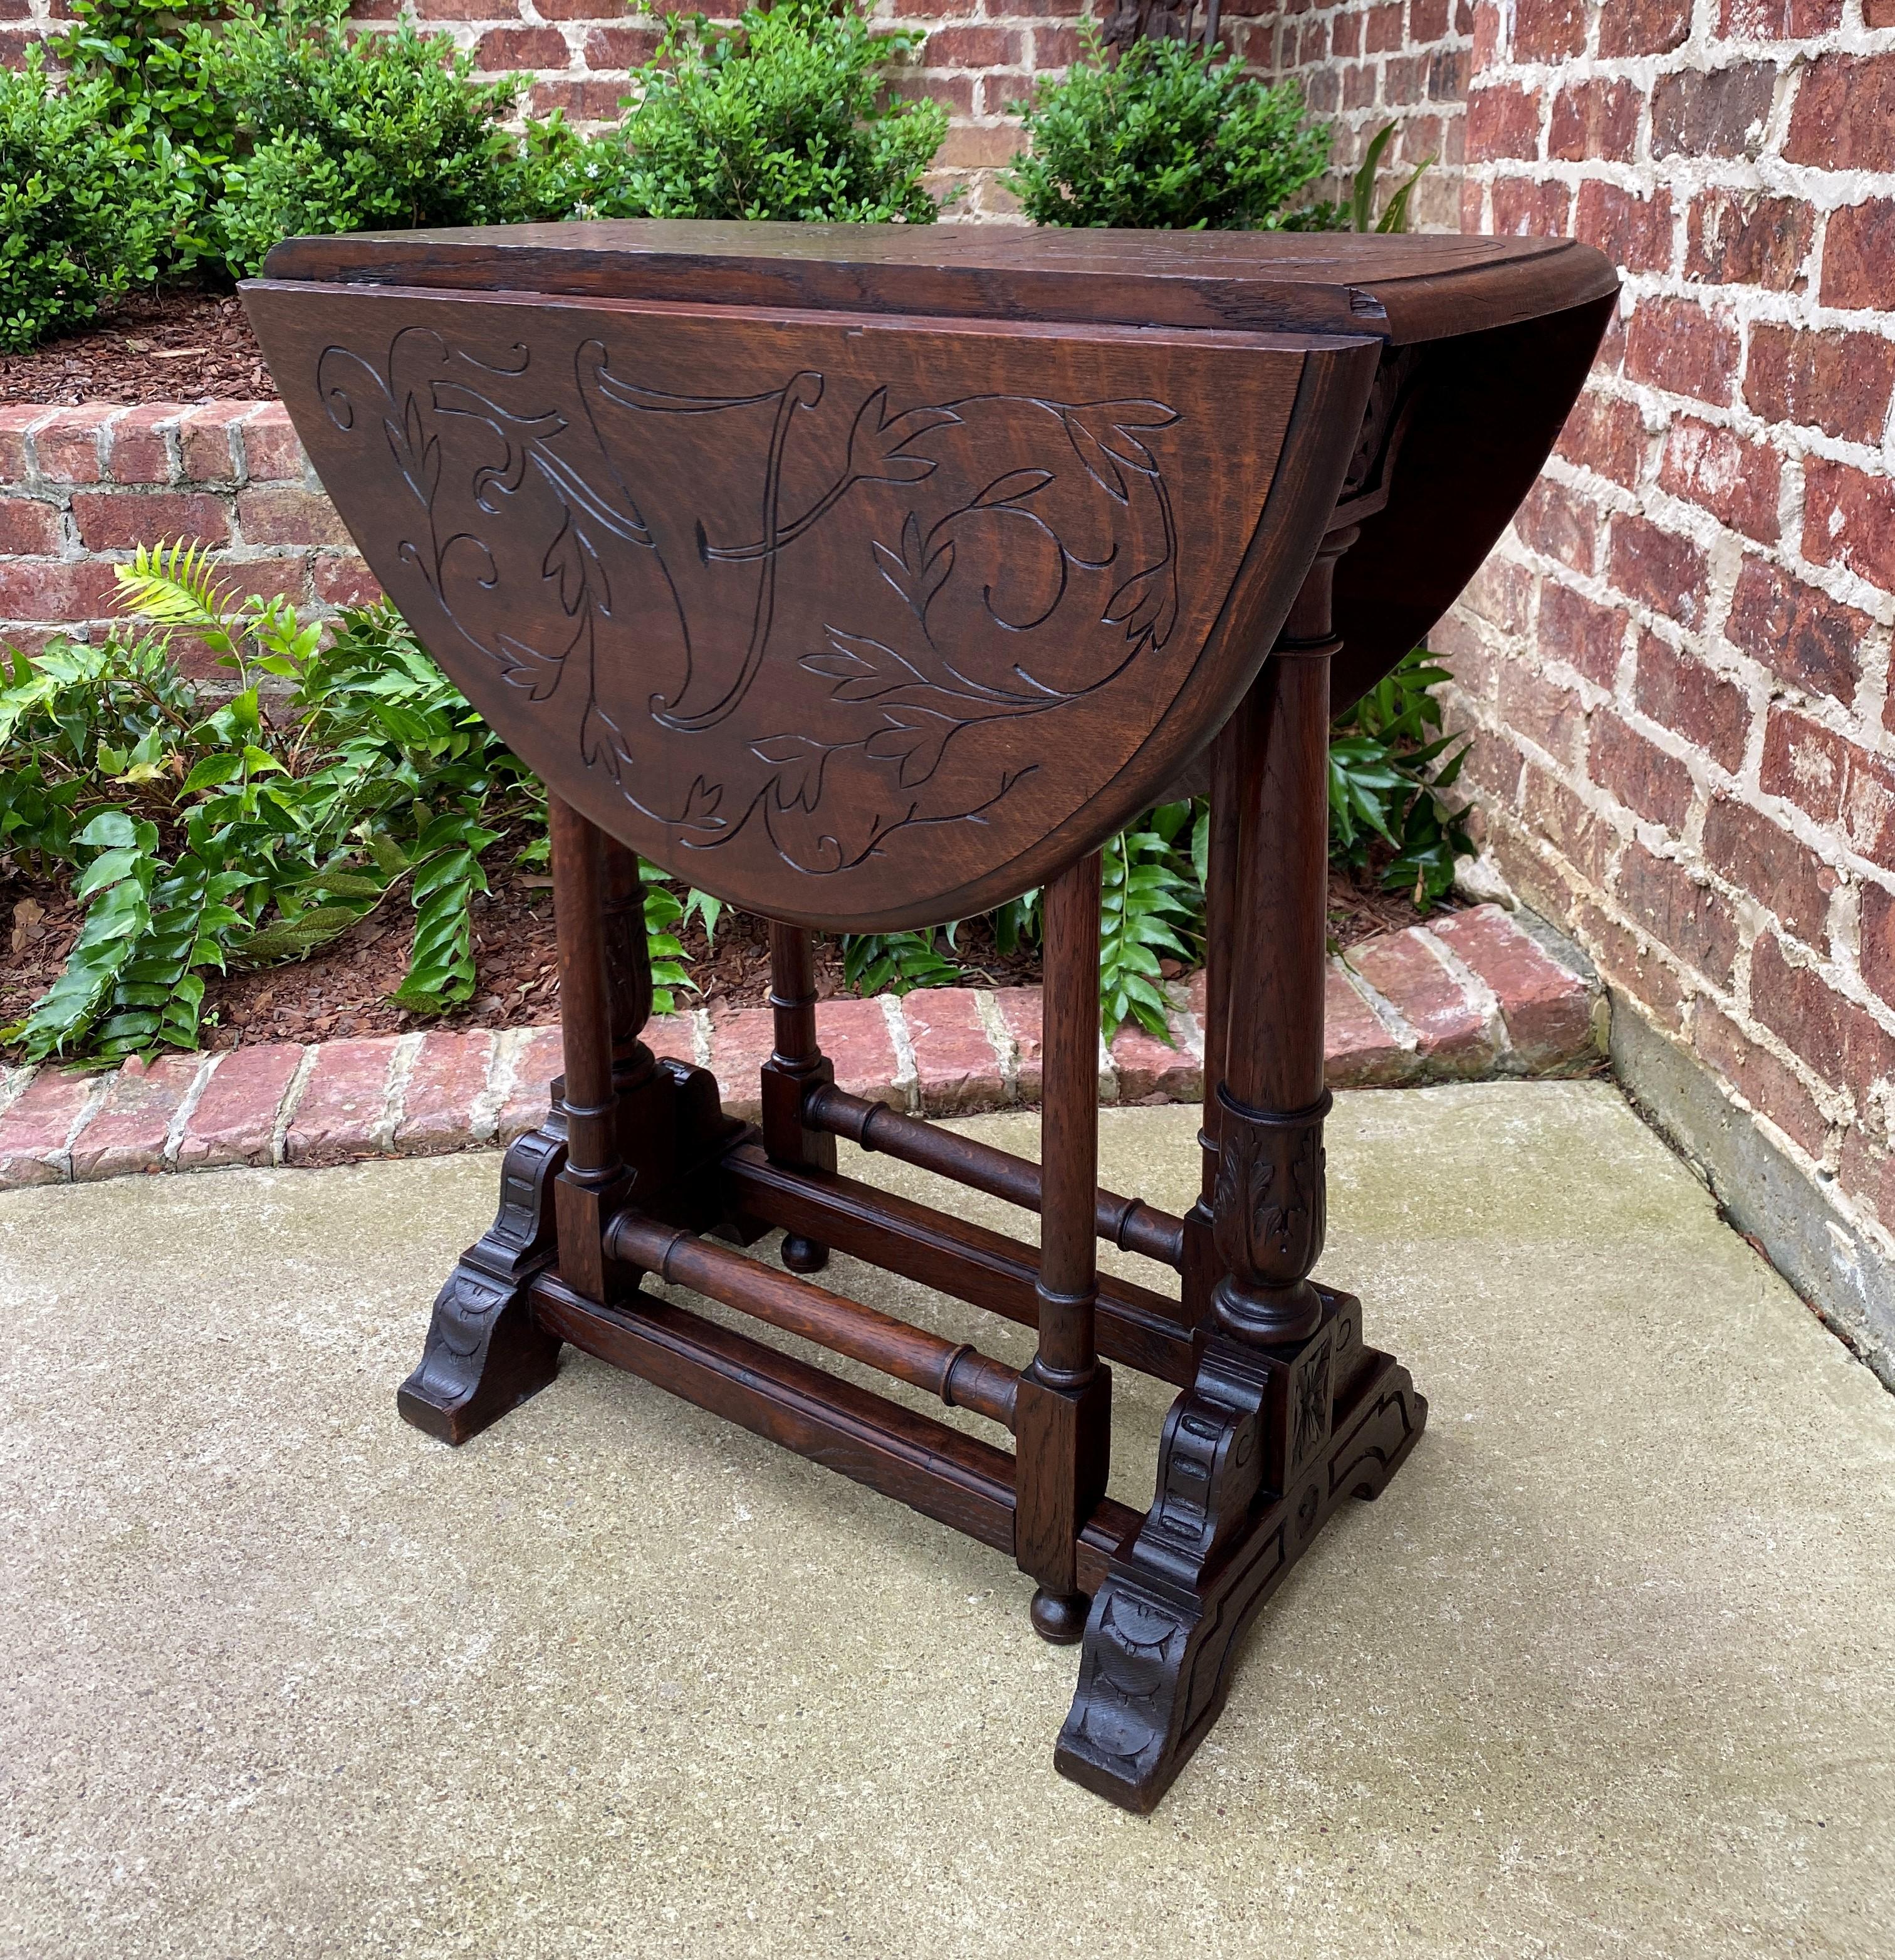 CHARMING Antique English Oak Drop Leaf Gateleg Oval Table~~CARVED TOP~~Turned Post Acanthus Legs with Carved Trestle Base~~c. 1920s 


 Always in high demand~~hard-to-find drop leaf table with turned post legs

 Solid and sturdy with very nice